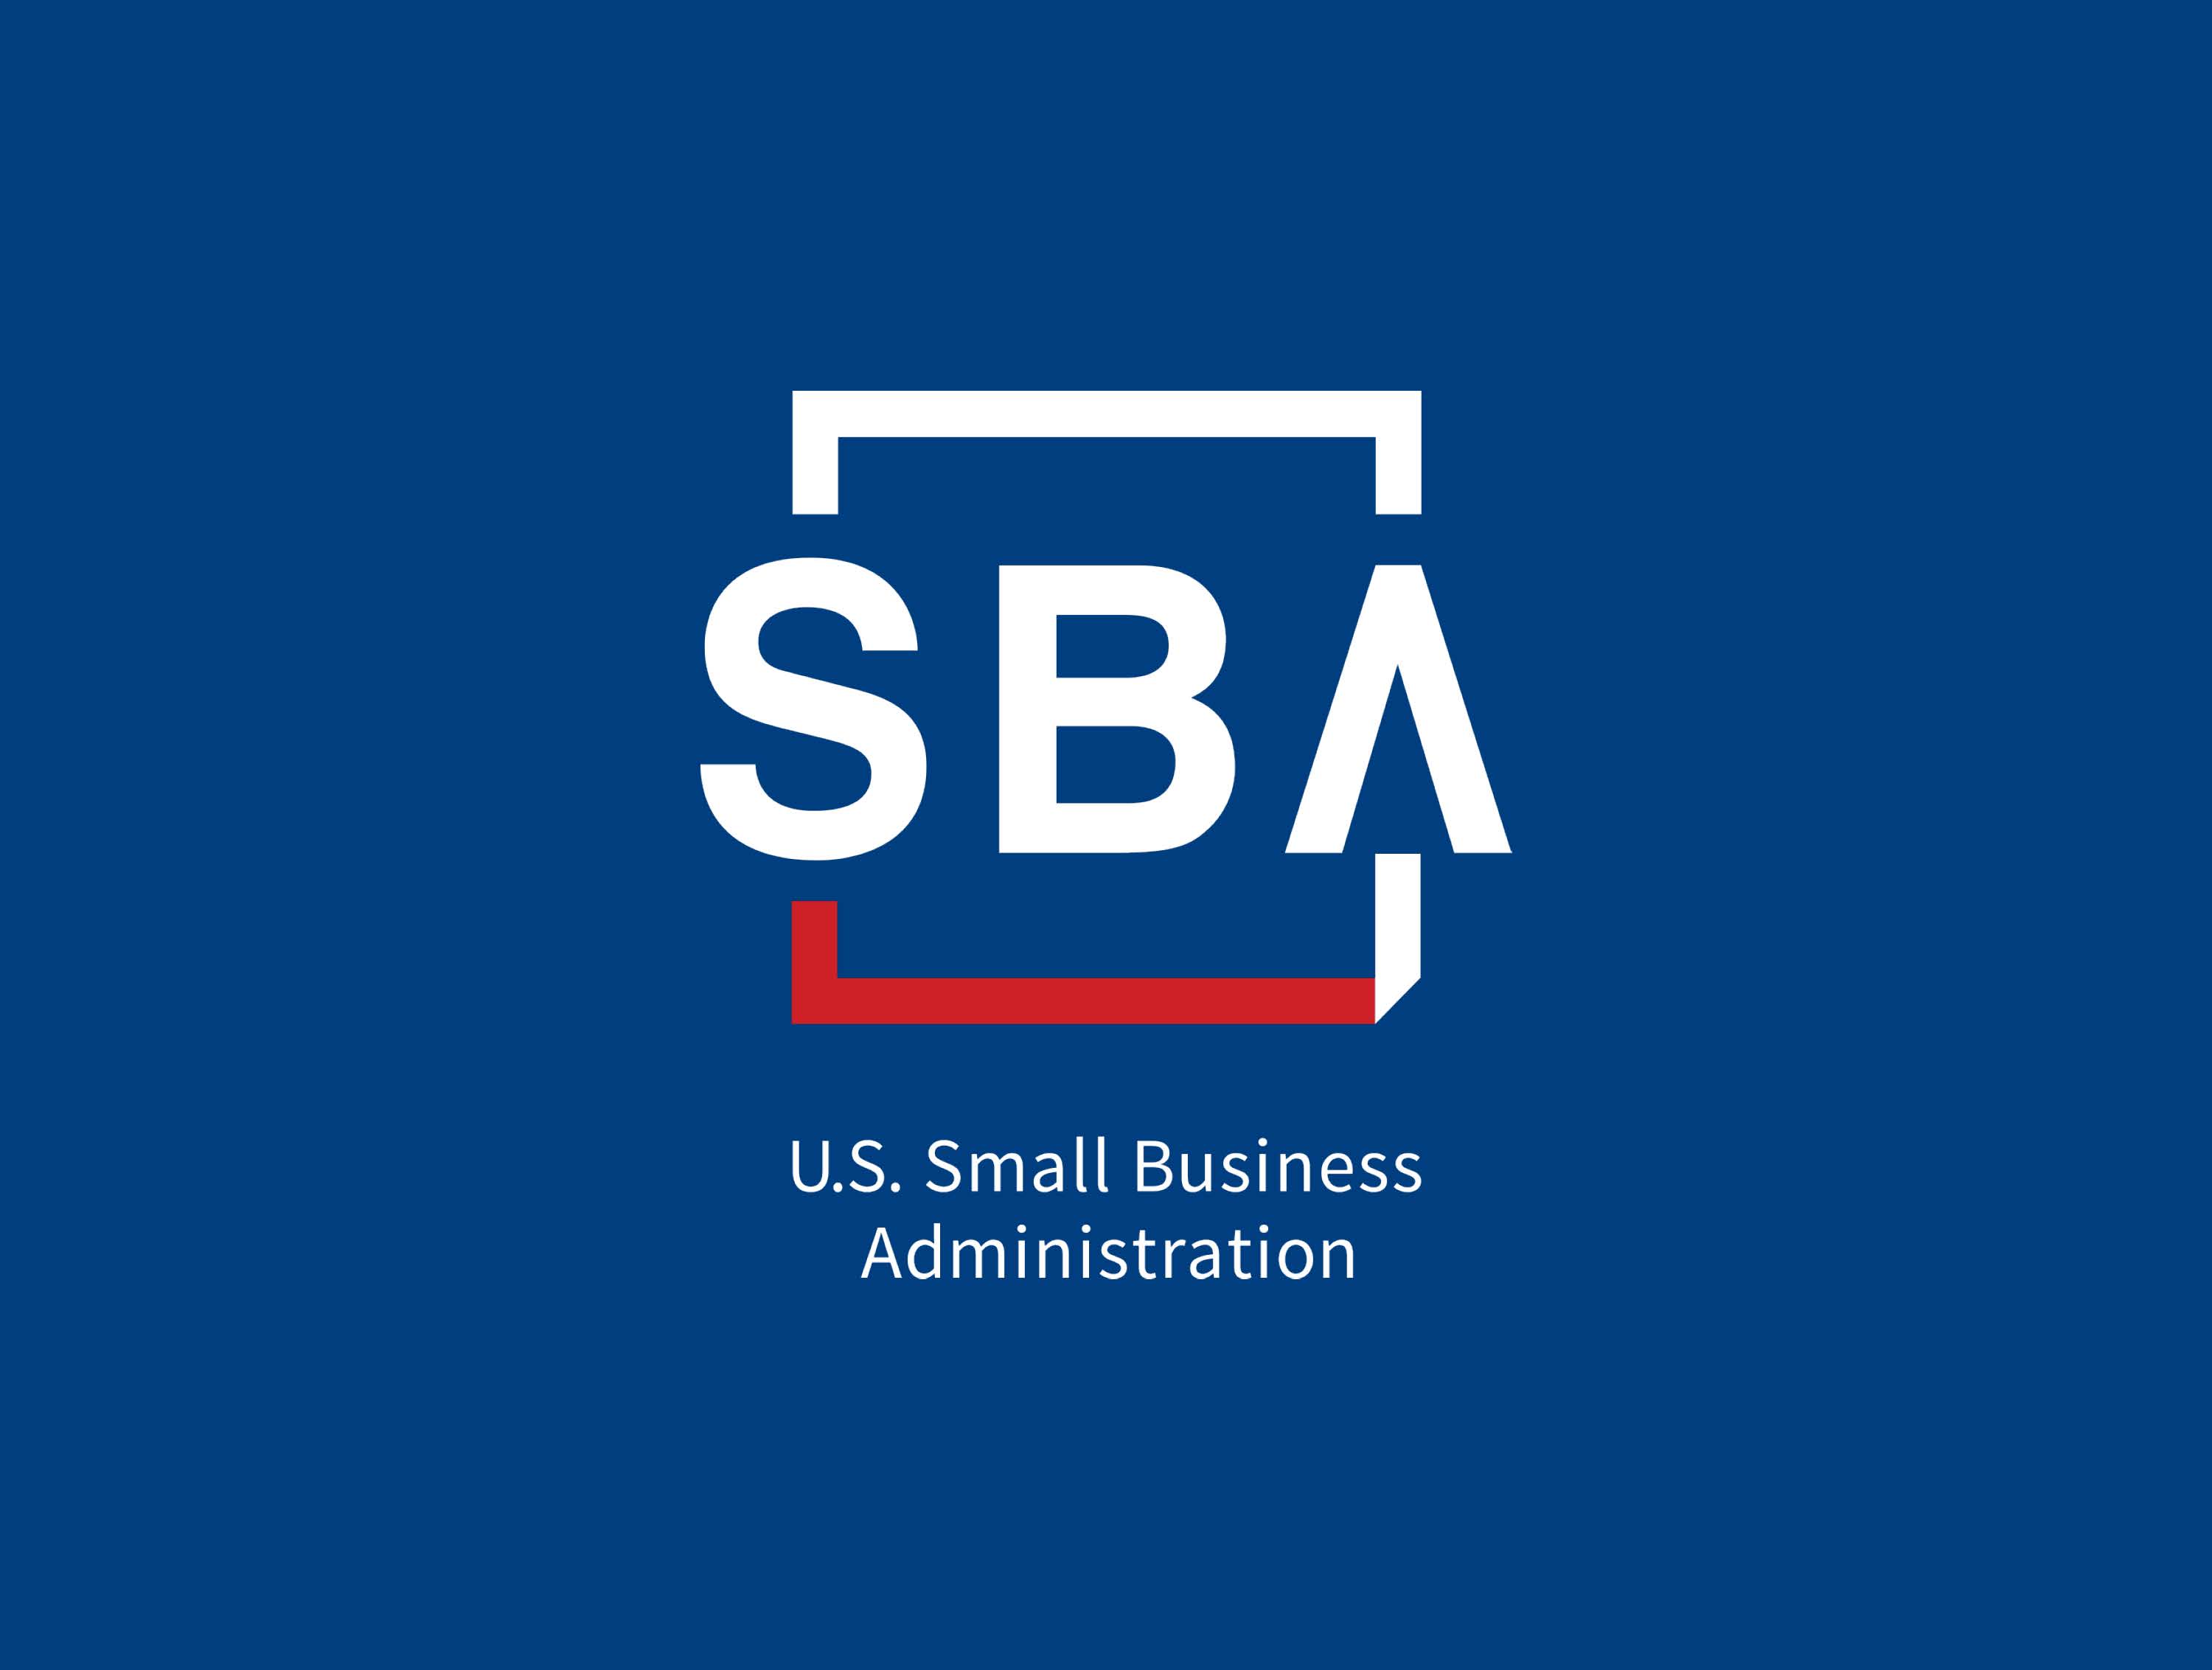 Small Business Administration cover image 